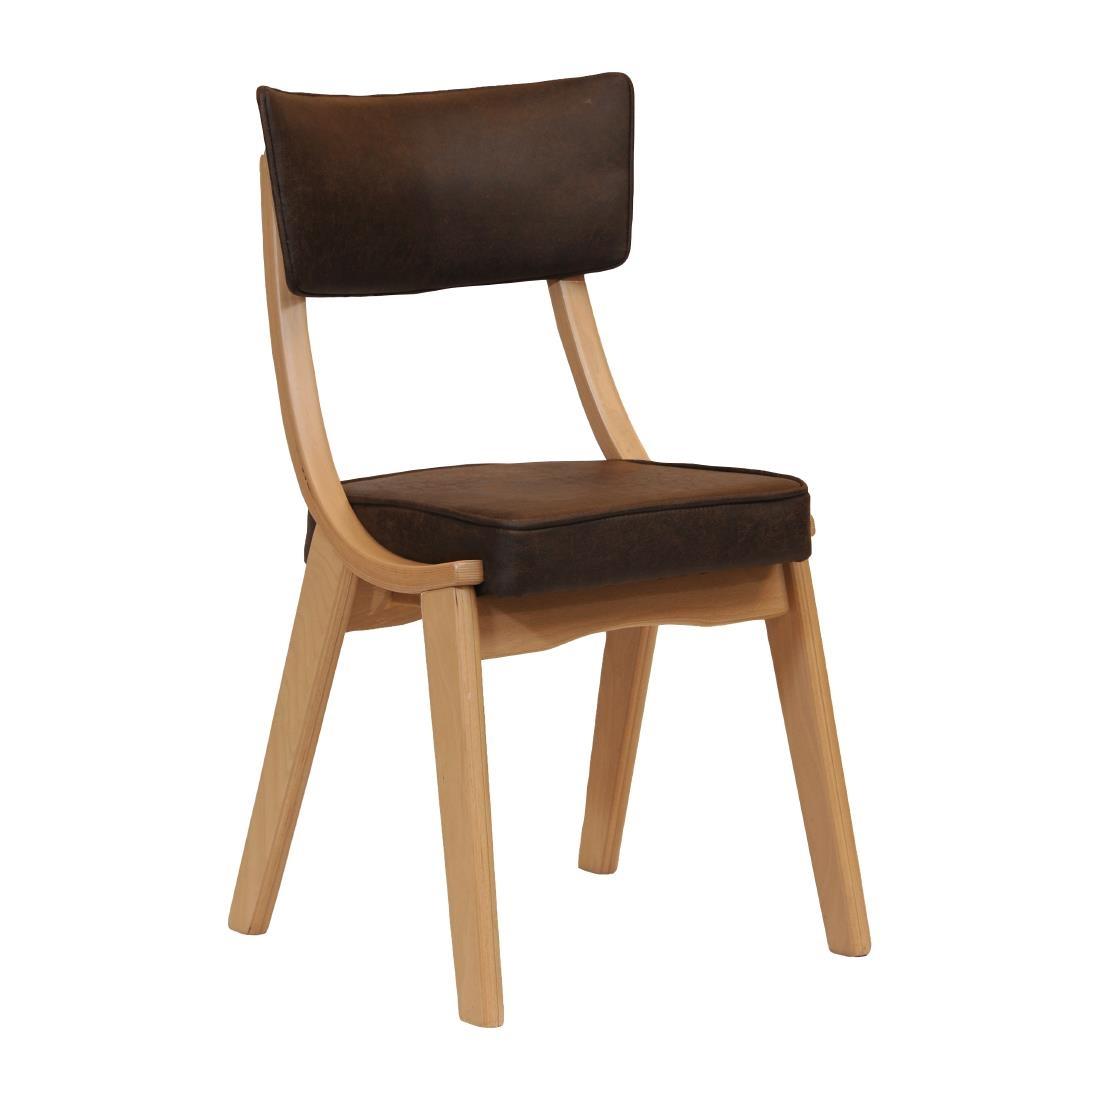 Chelsea Dining Chair Buffalo Espresso Light Wood (Pack of 2)